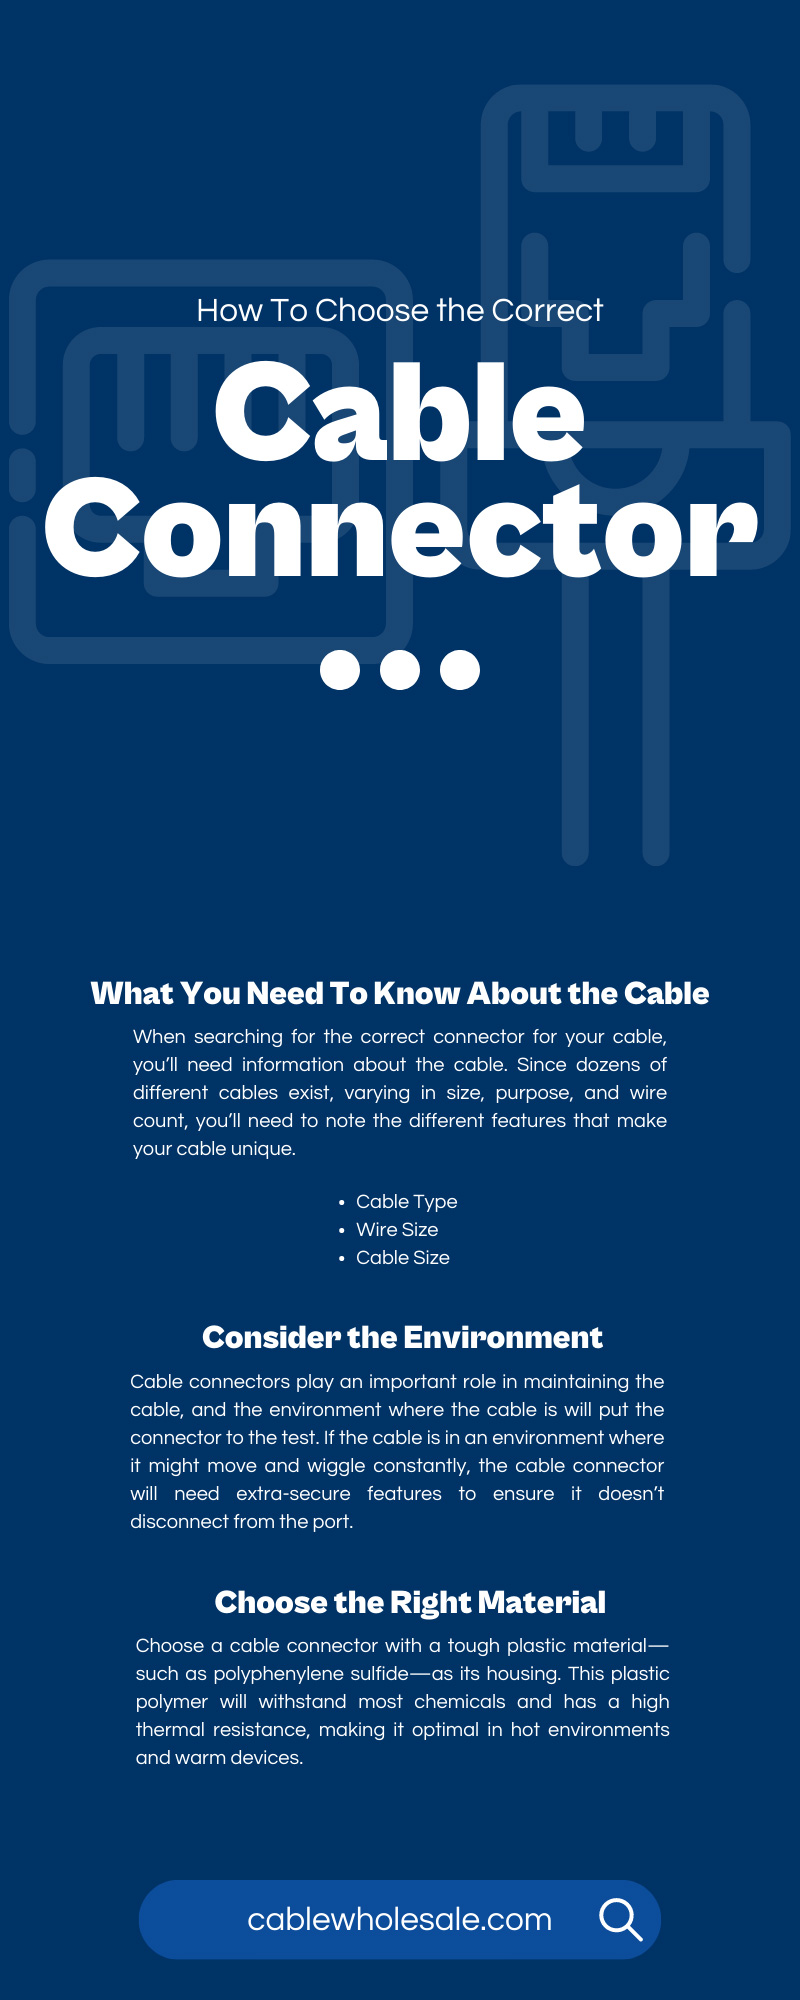 How To Choose the Correct Cable Connector